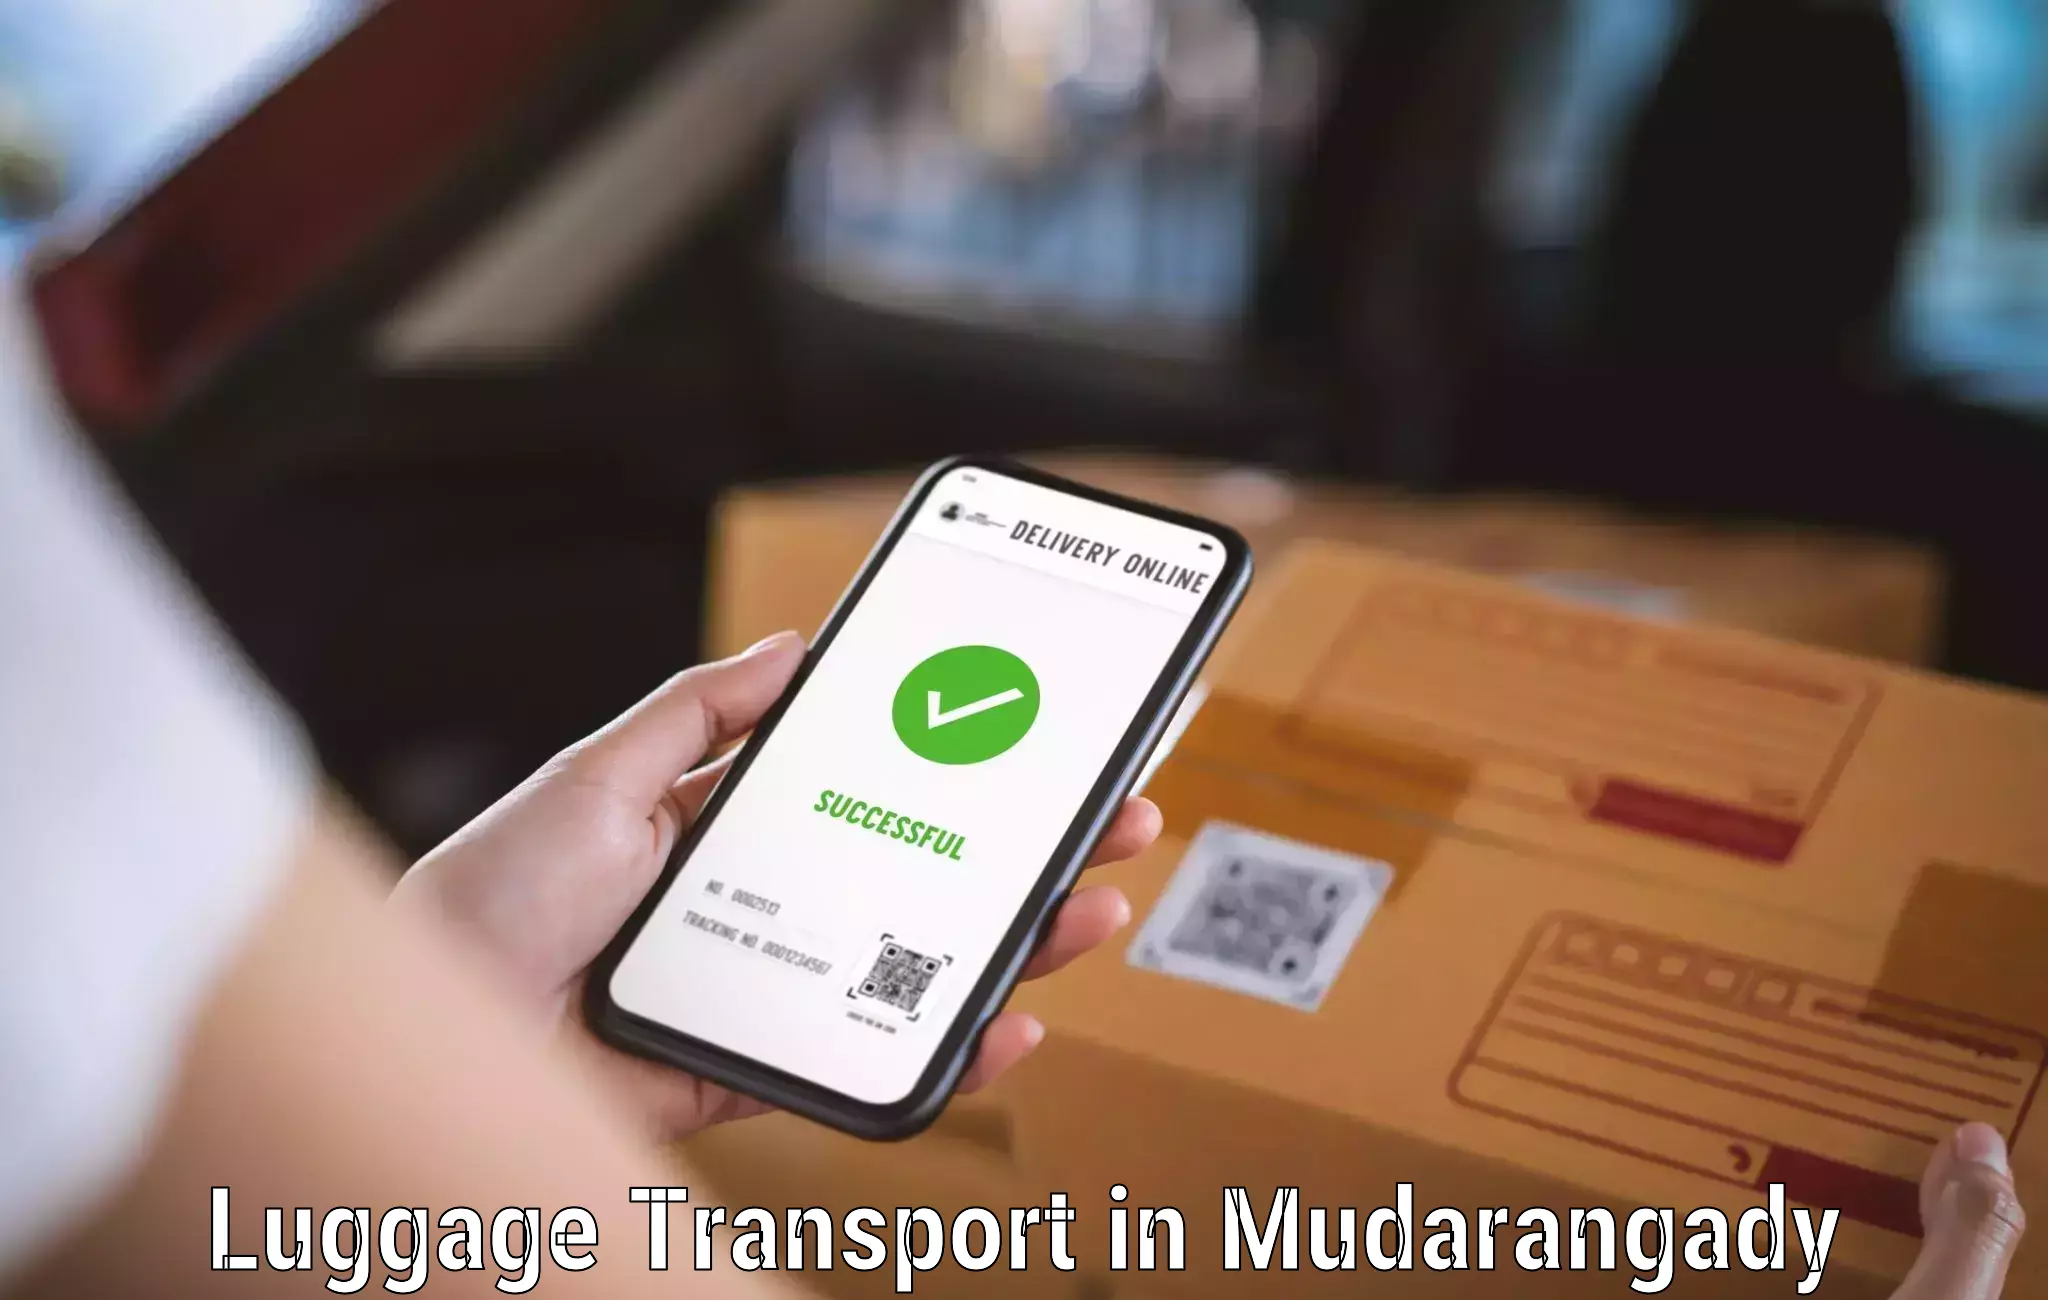 Luggage transport solutions in Mudarangady